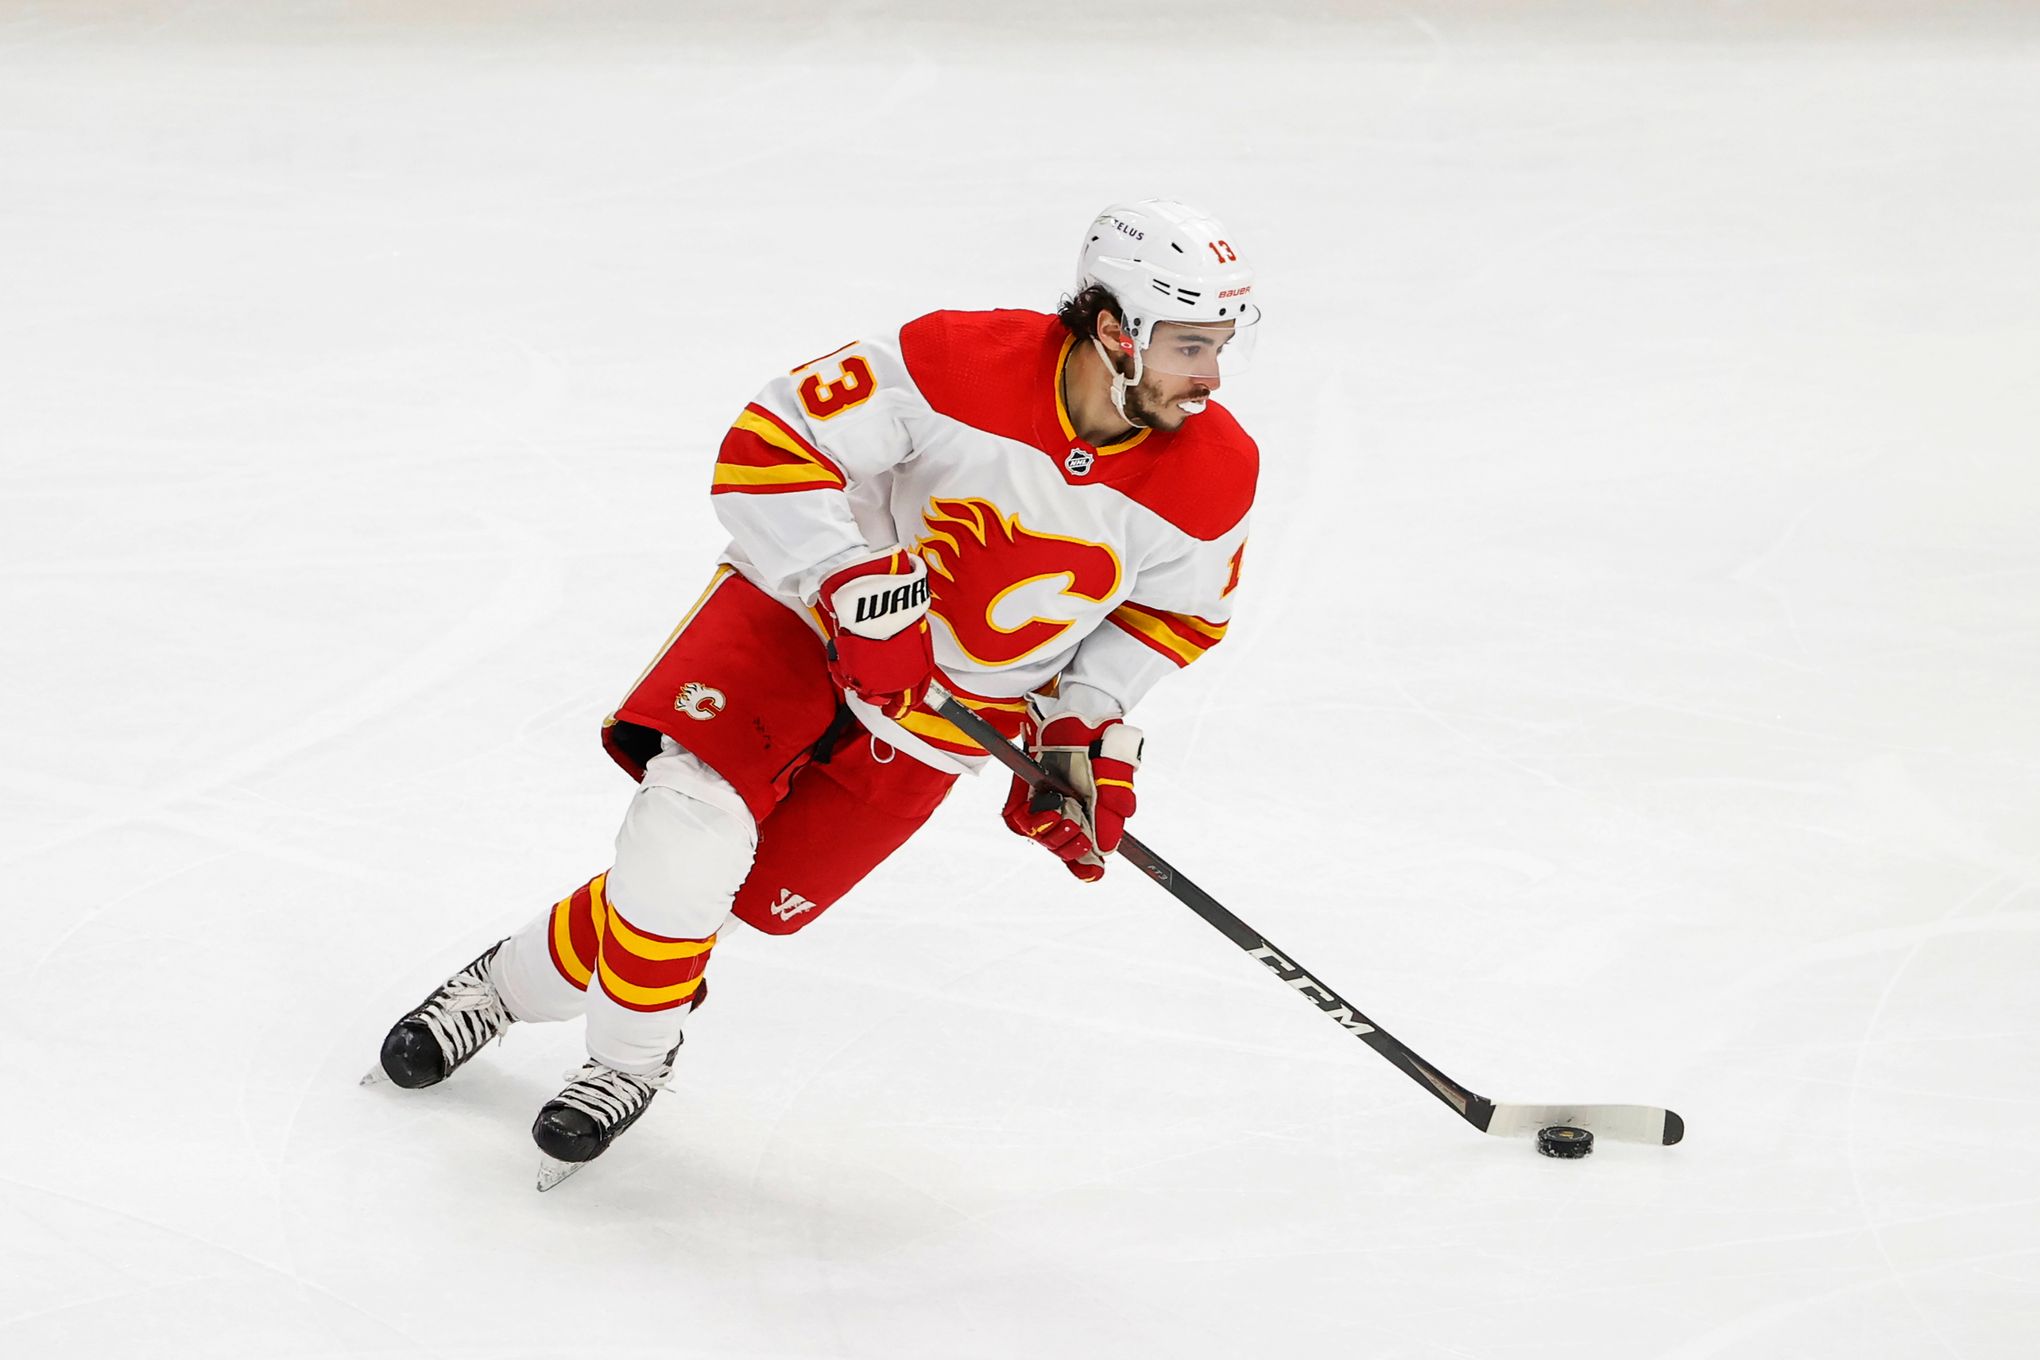 Gaudreau has career-high 6 points as Flames complete wild comeback